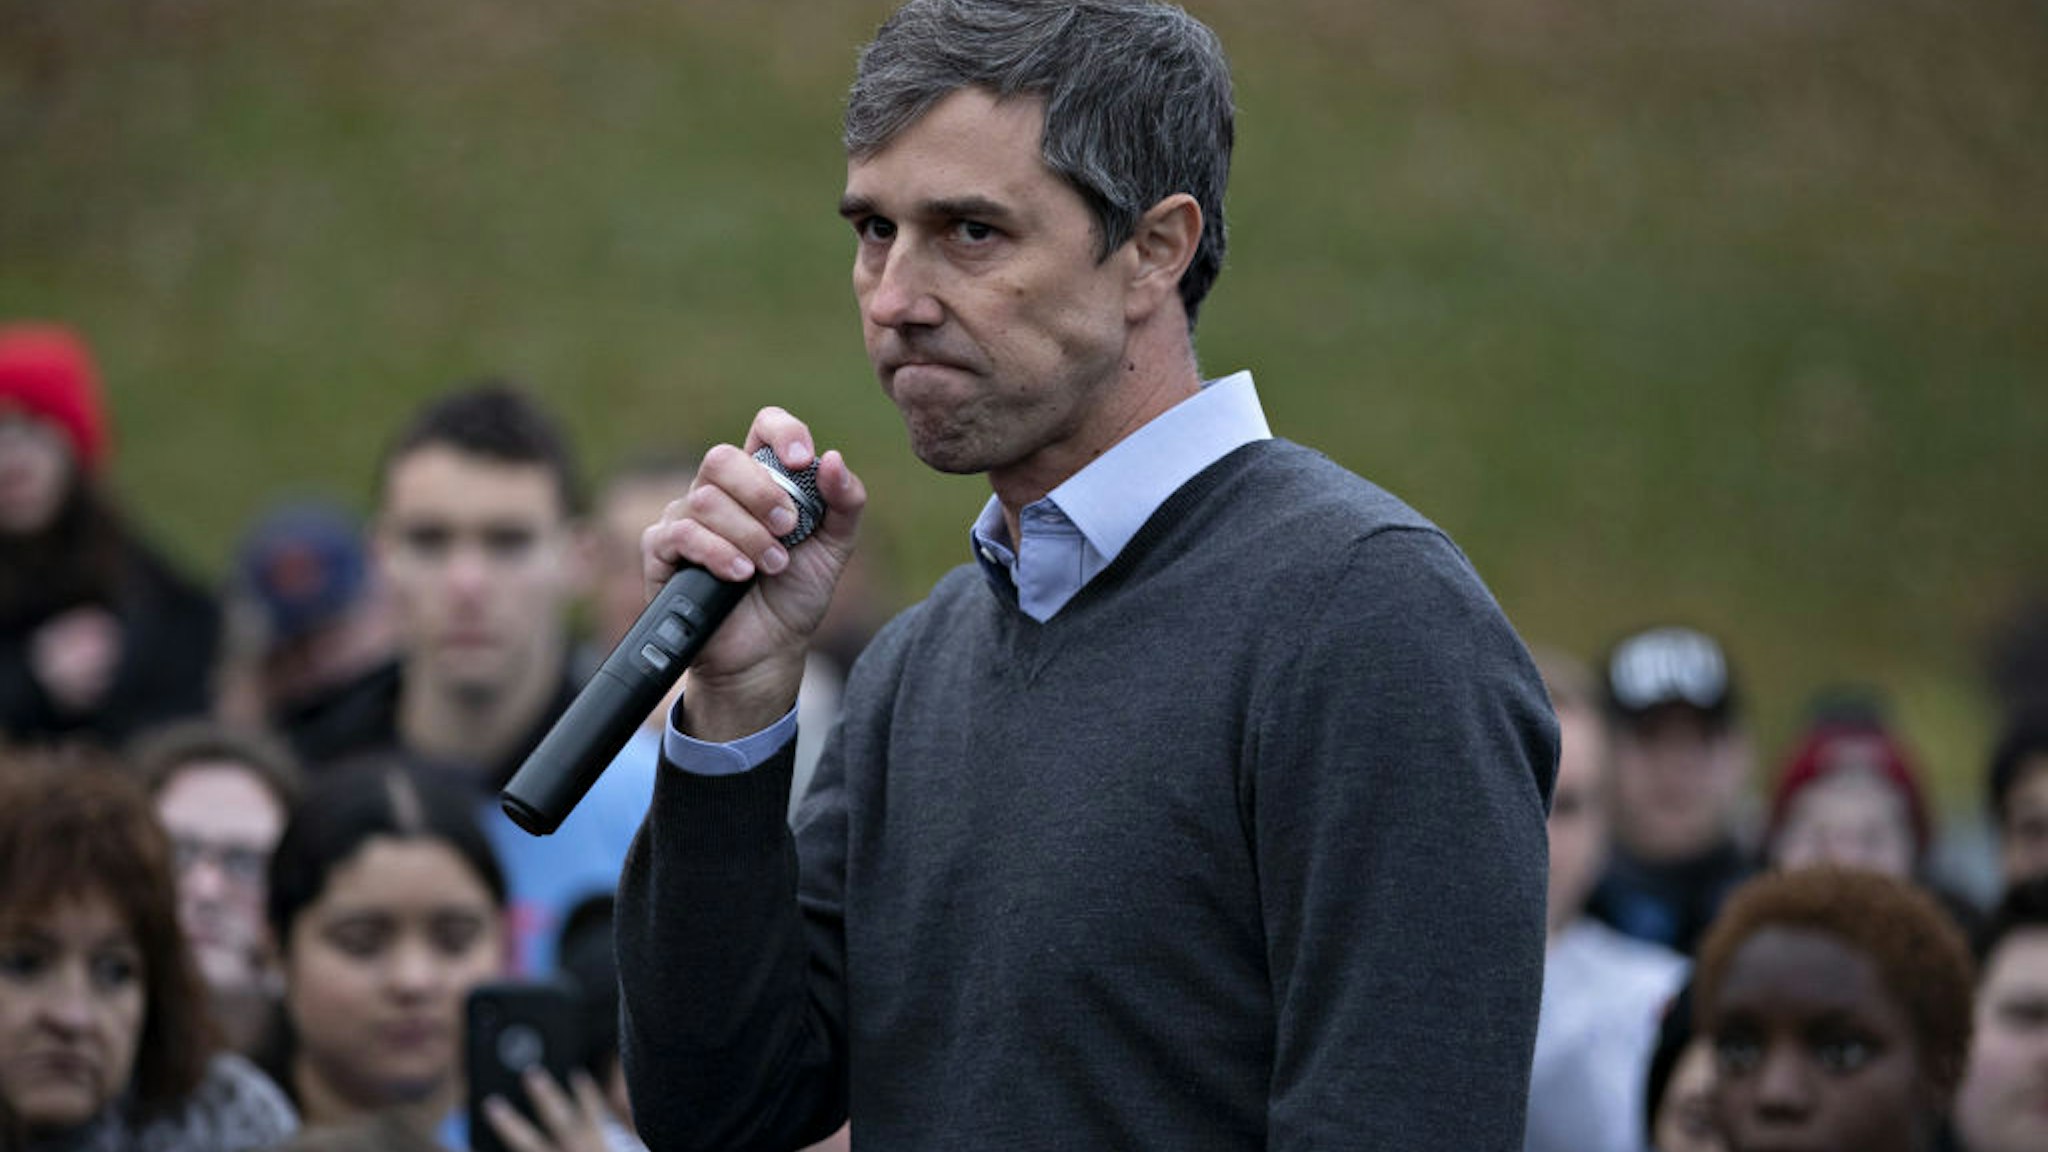 Beto O'Rourke, former Representative from Texas, speaks on the sidelines of the Iowa Democratic Party Liberty &amp; Justice Dinner in Des Moines, Iowa, U.S., on Friday, Nov. 1, 2019. The former Texas congressman said in a blog post earlier in the day that he was ending his bid for the White House amid lackluster fundraising and poor poll numbers. Photographer: Daniel Acker/Bloomberg via Getty Images